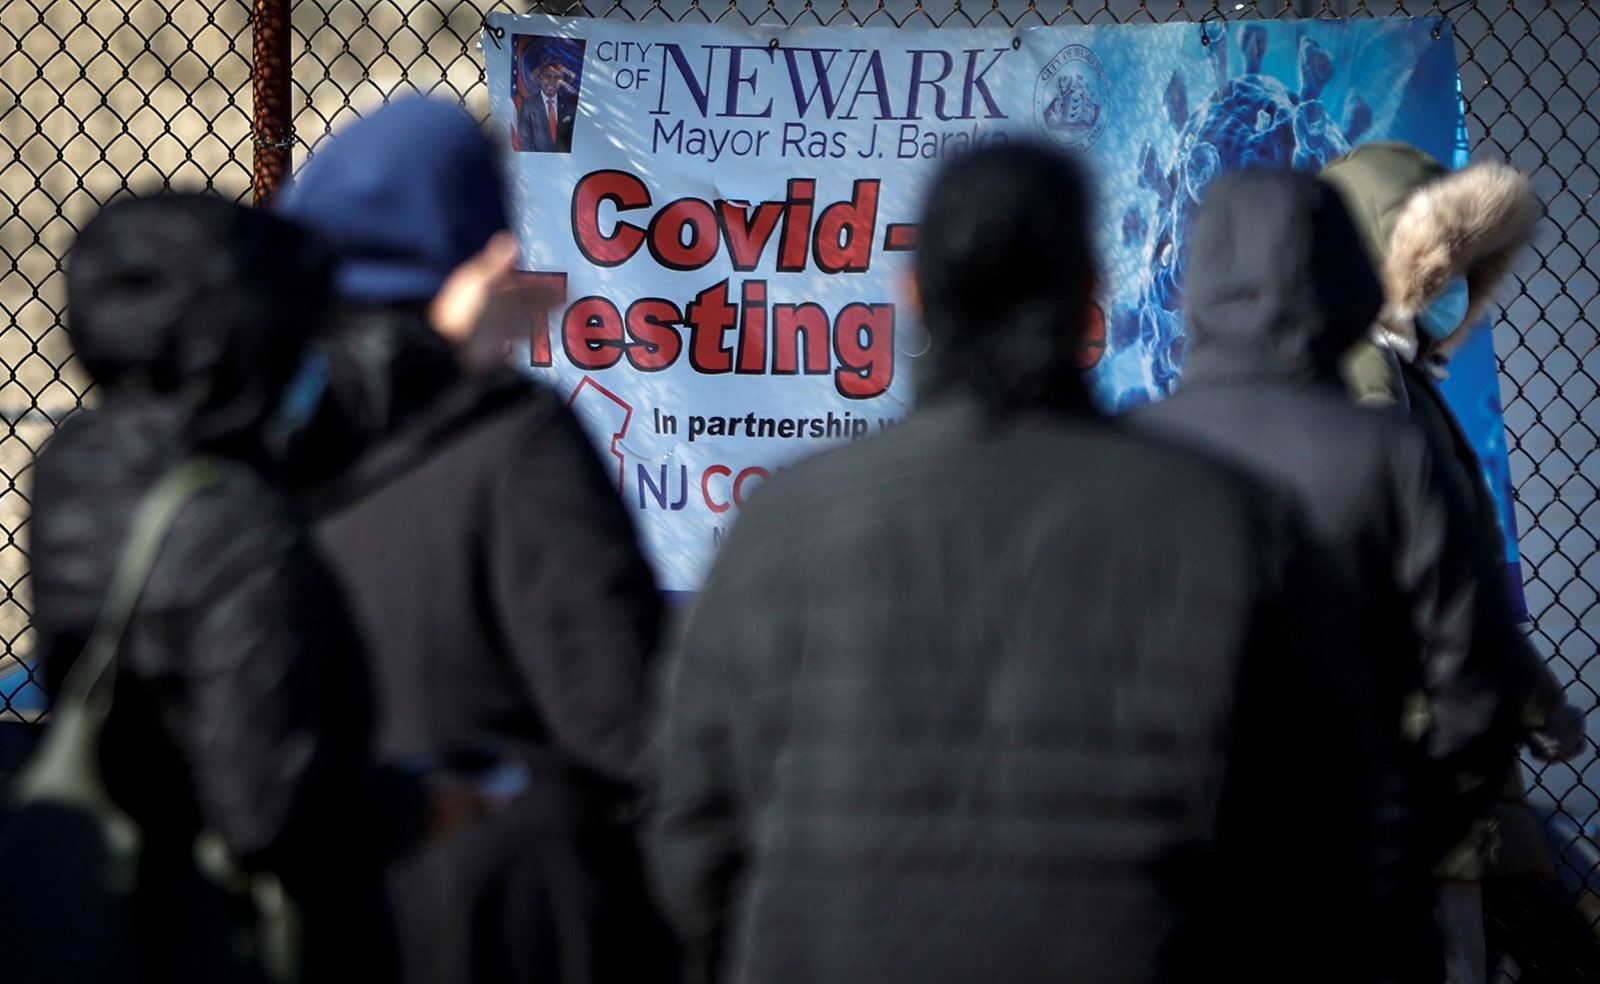 People wait in line to get tested for Covid-19 in Newark, New Jersey, on January 4.